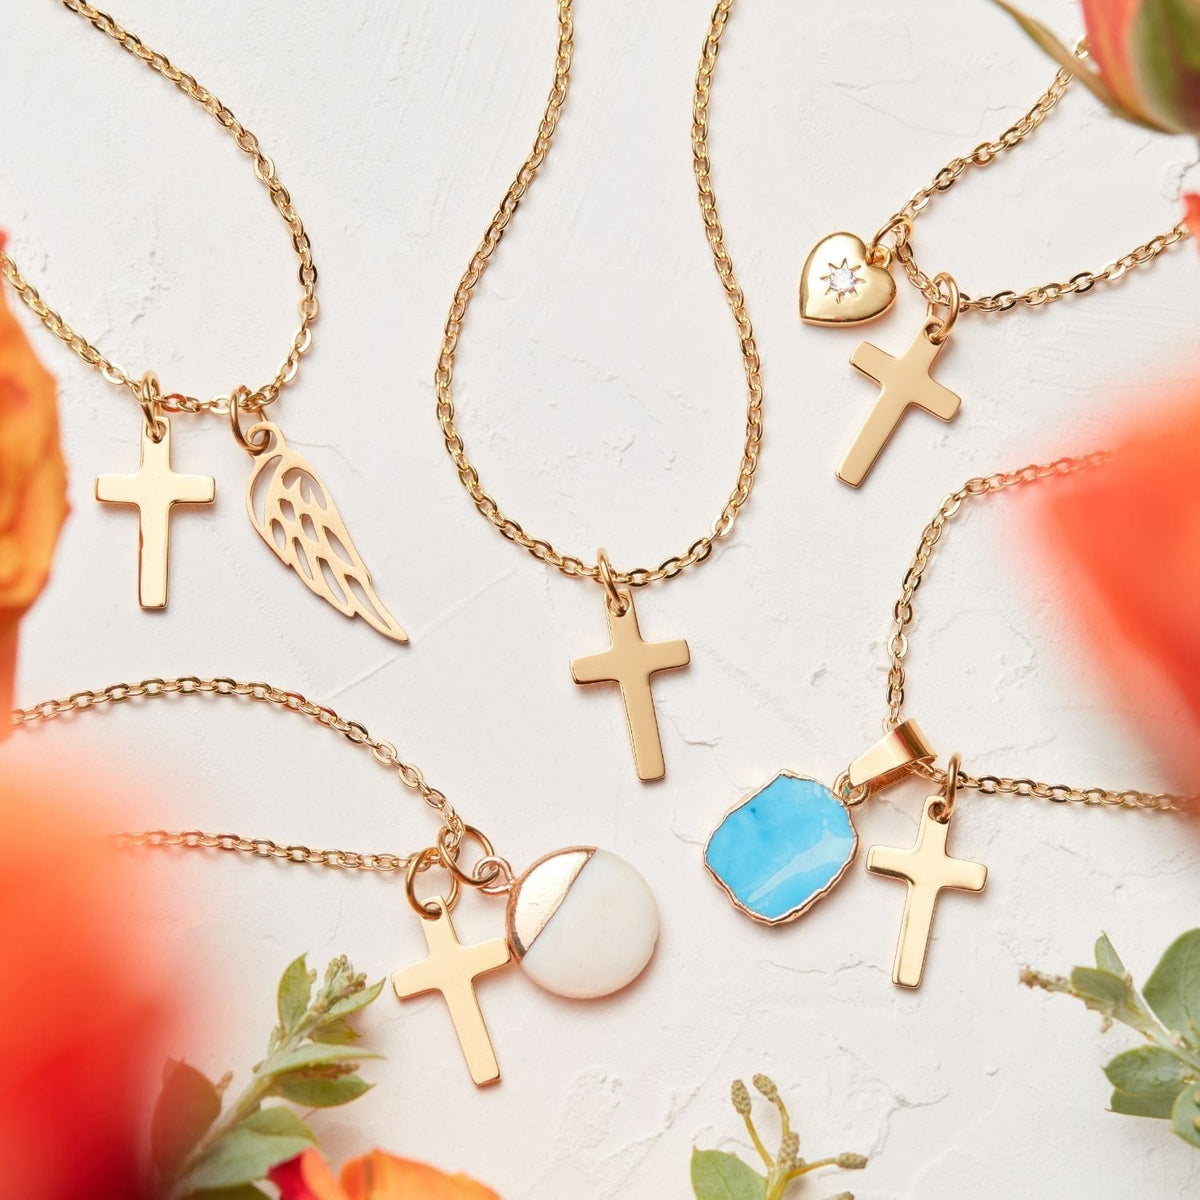 To My Beautiful Daughter | Amazing Woman God Has Made You | Cross Necklace